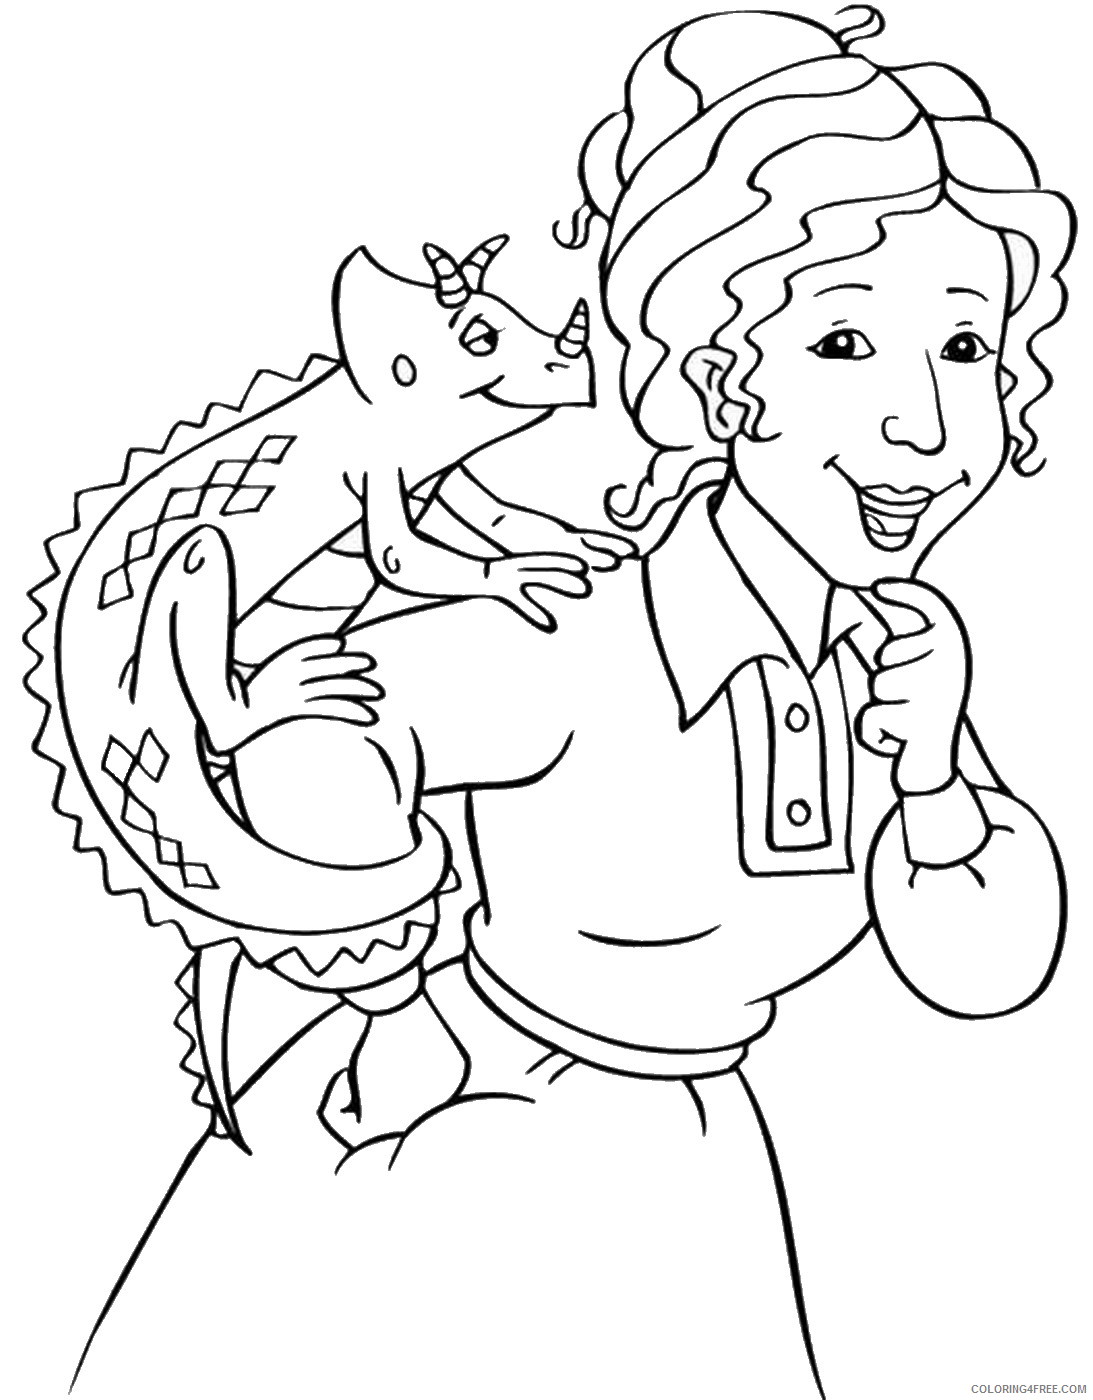 The Magic School Bus Coloring Pages Cartoons magic_school_bus_cl09 Printable 2020 6479 Coloring4free